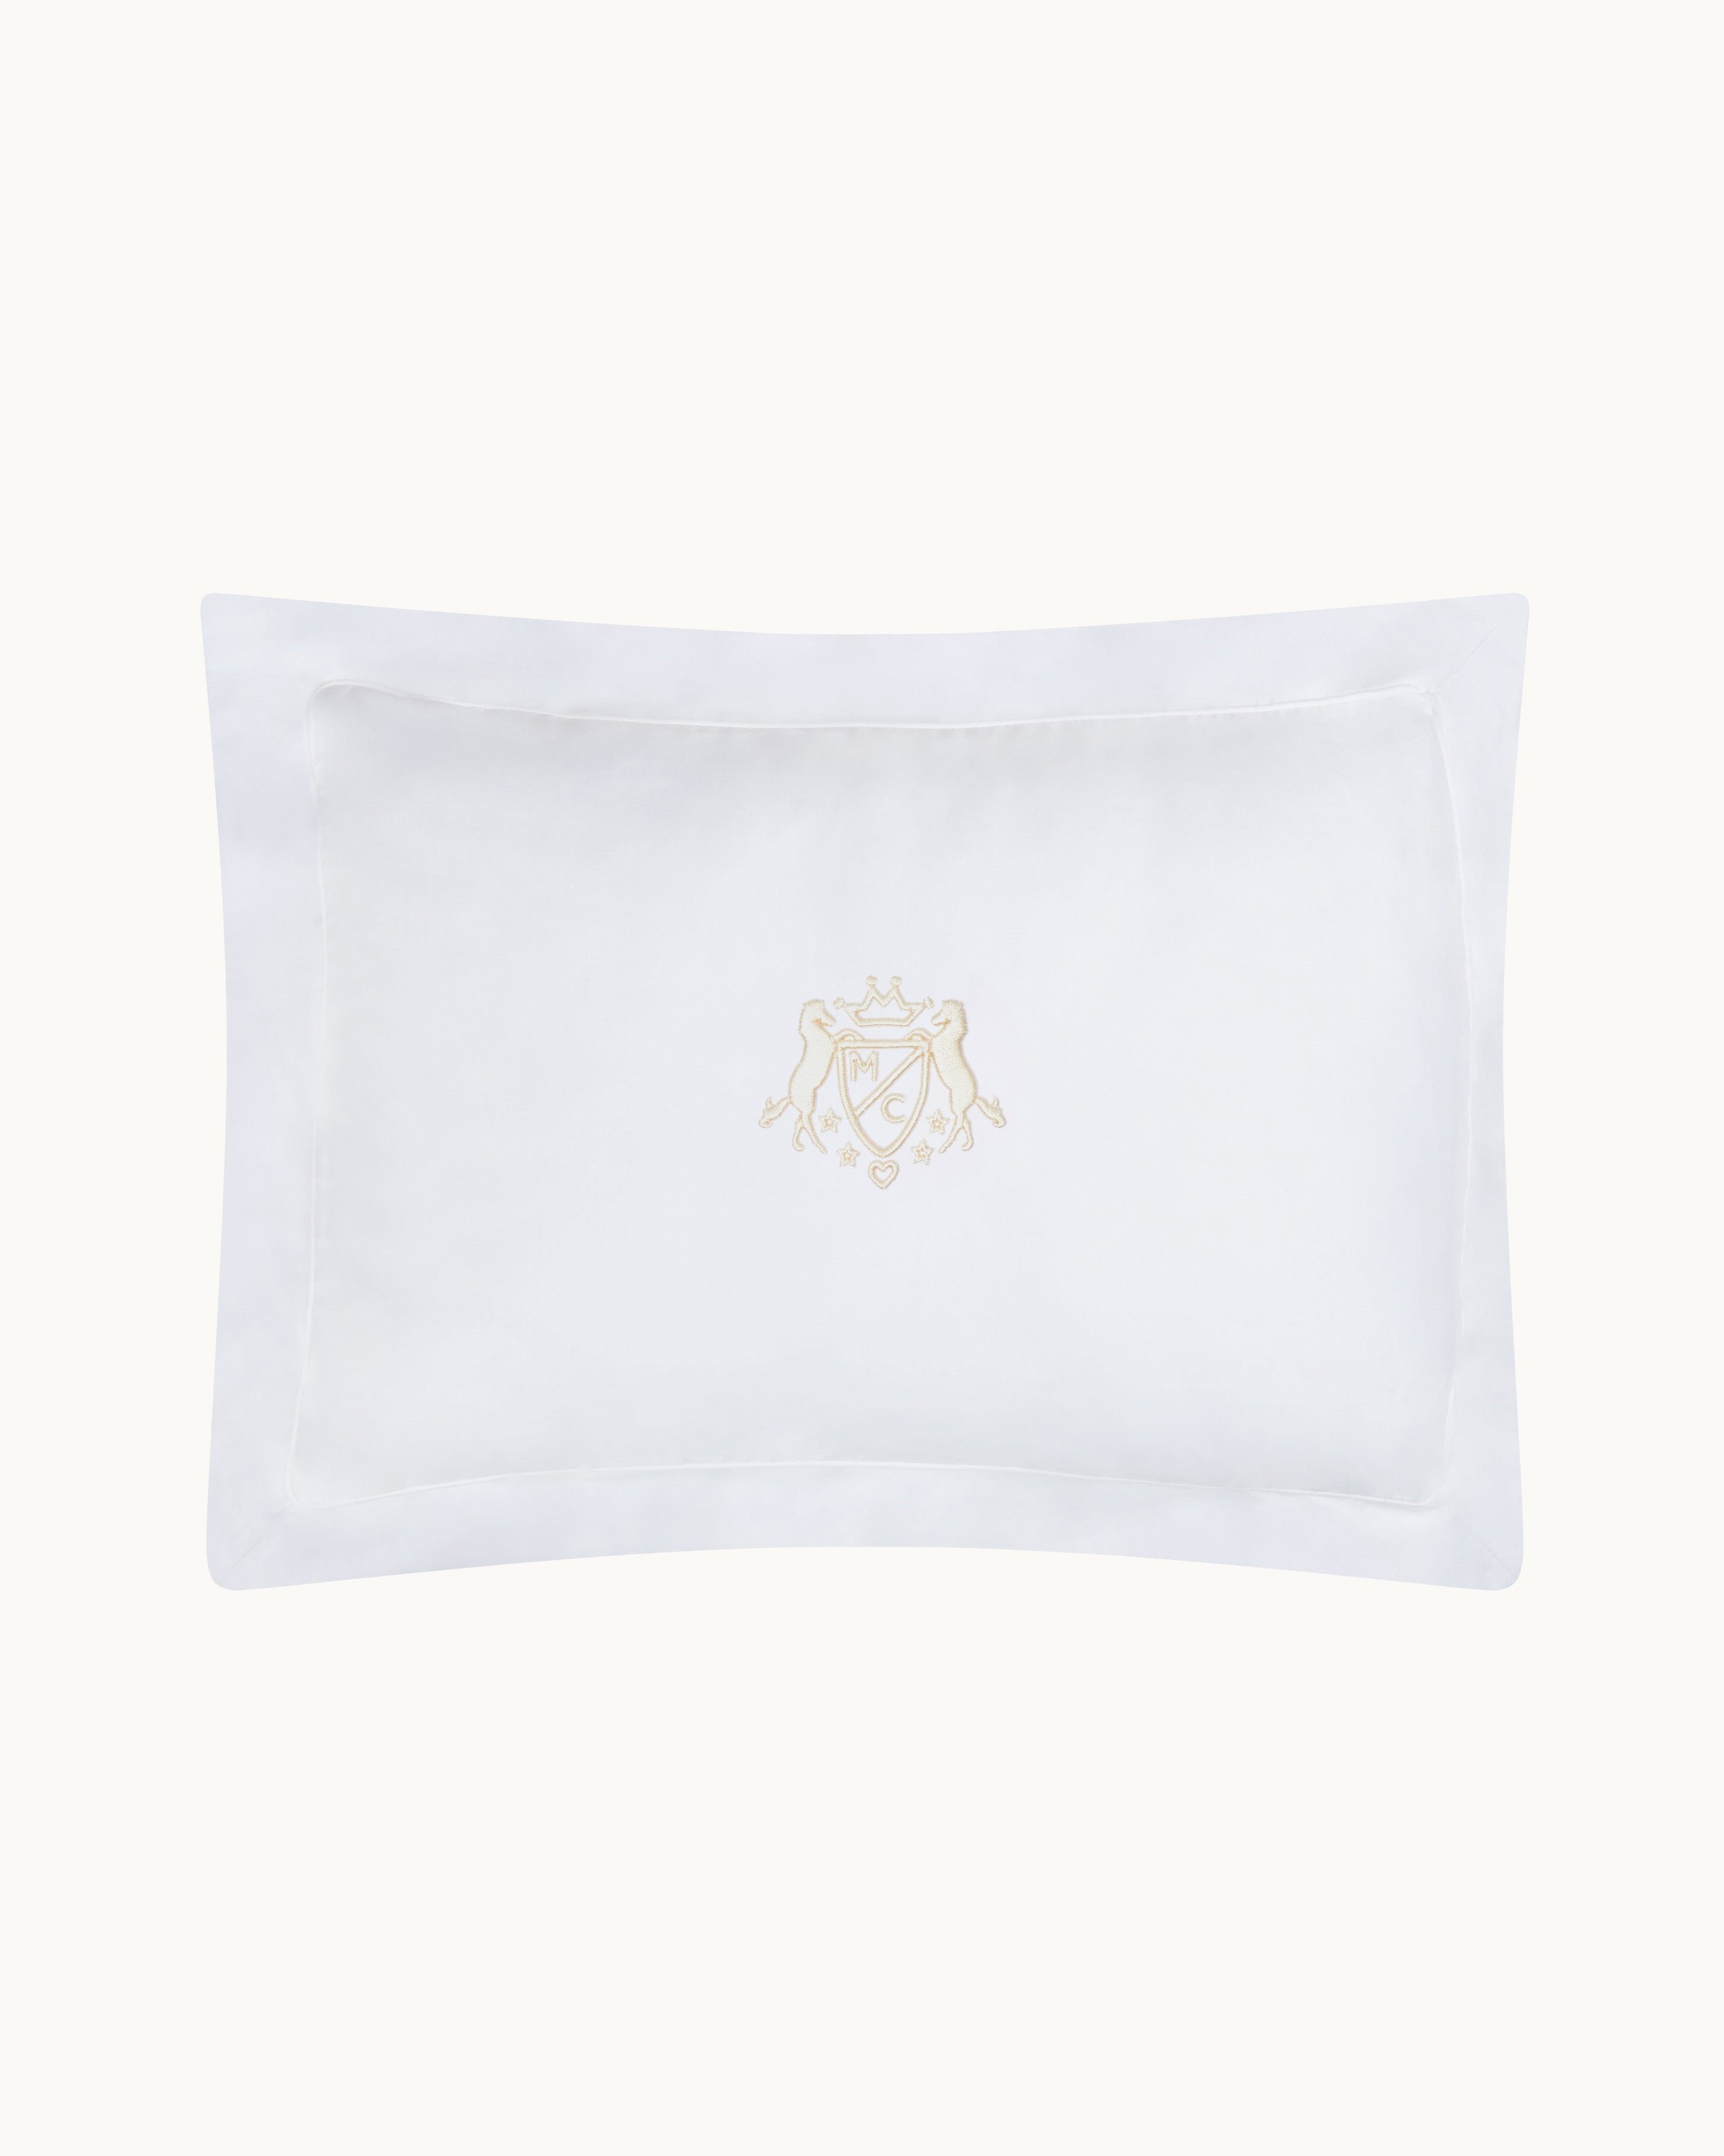 The Crest Cushion Cover